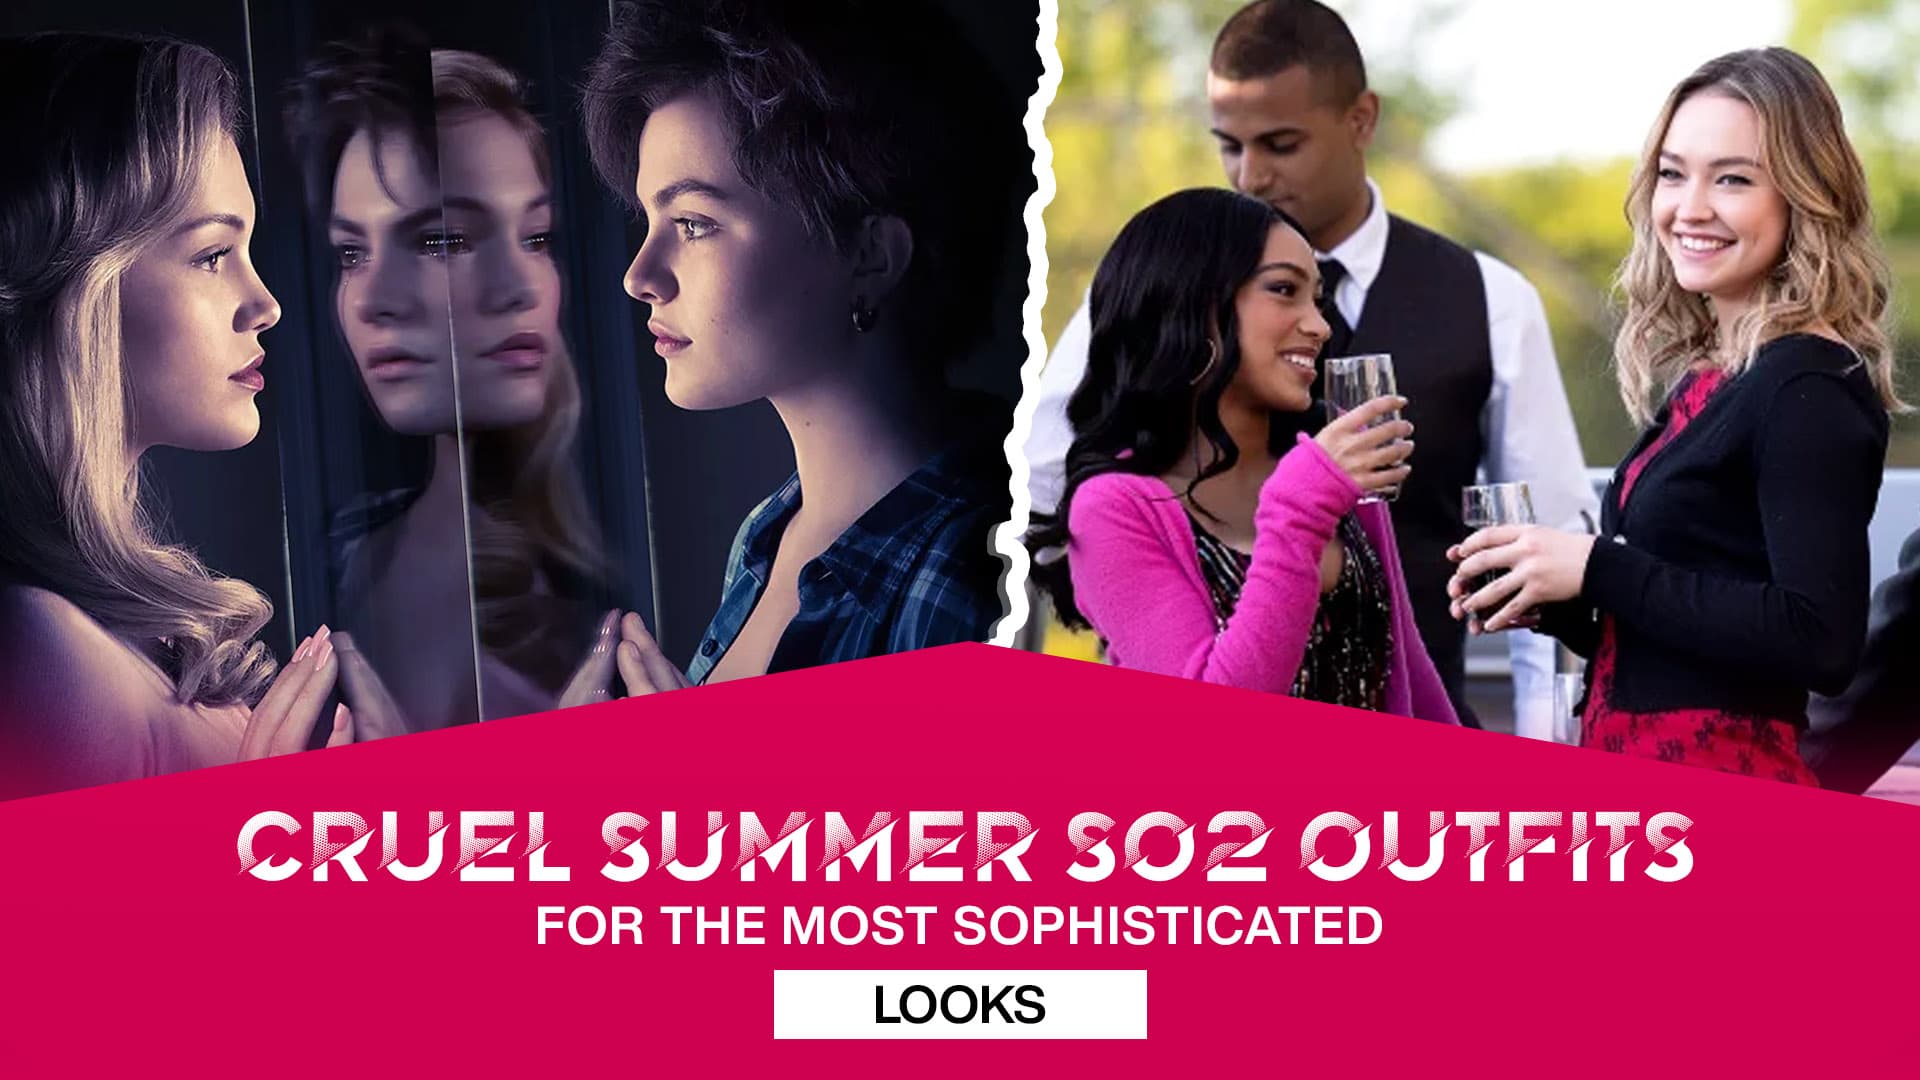 Tv-Series-Cruel-Summer-S02-Outfits-for-the-most-sophisticated-looks